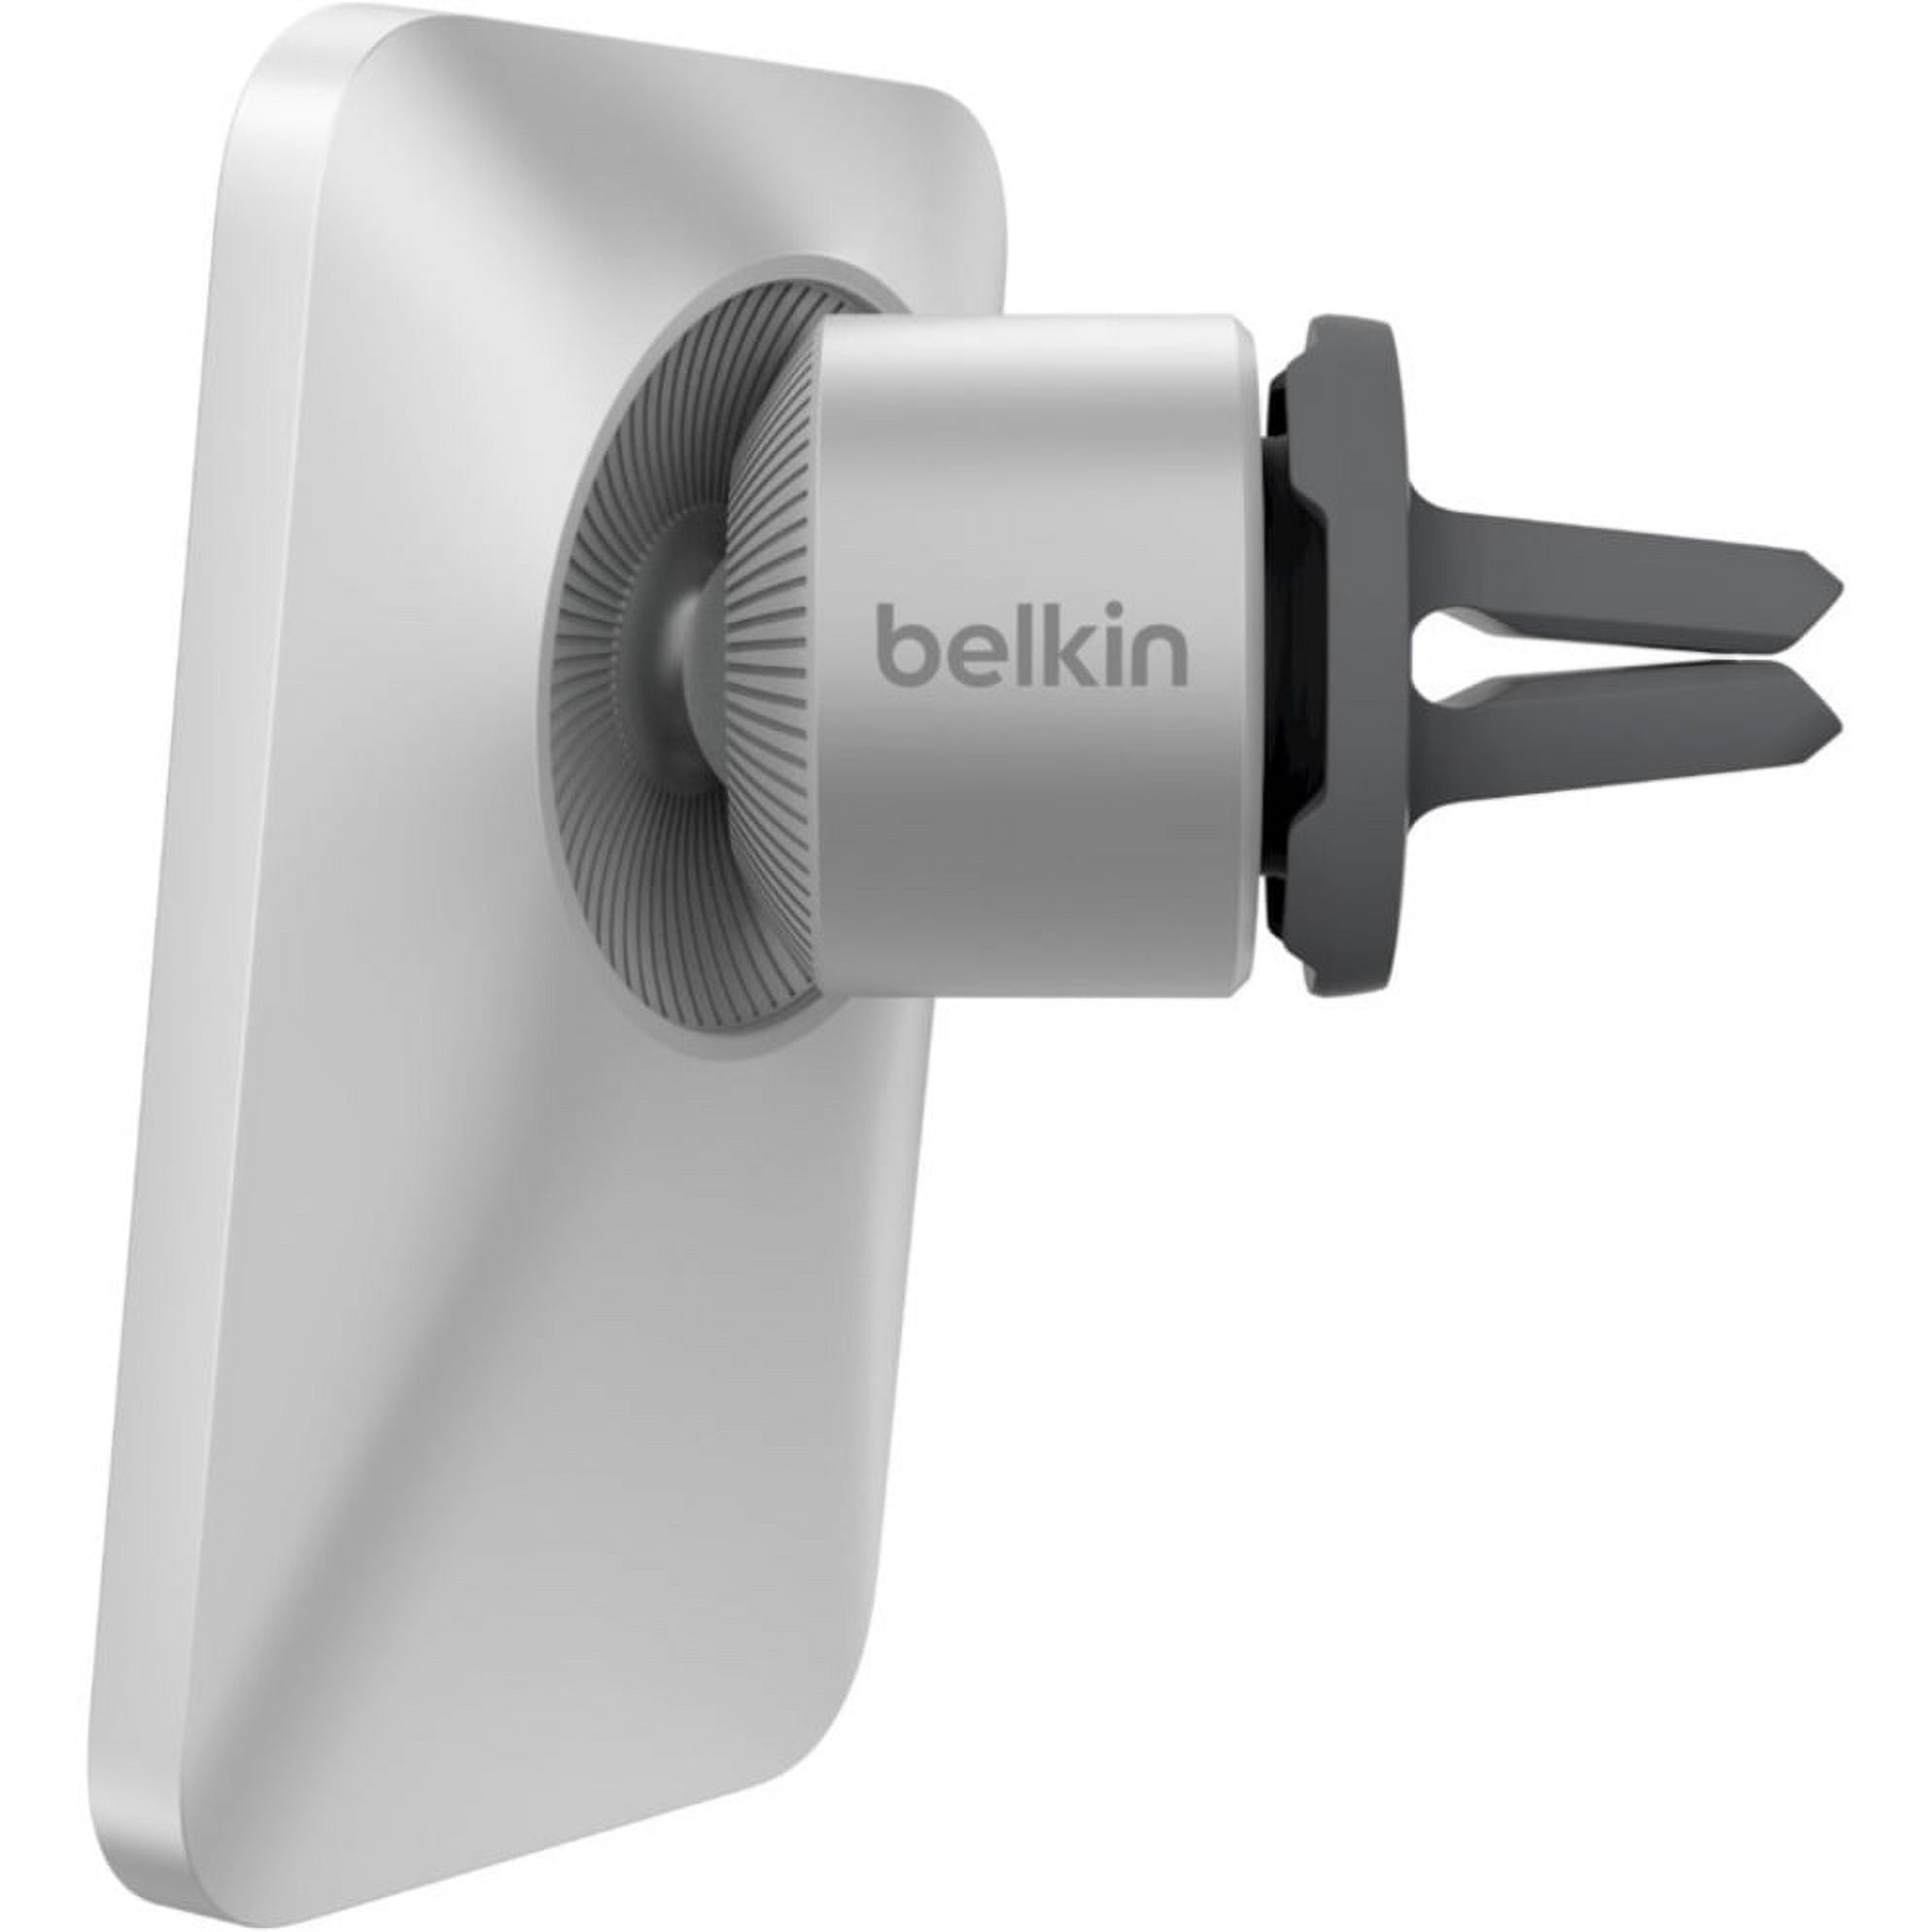 Belkin iPhone Mount review: Every display needs this MagSafe mount